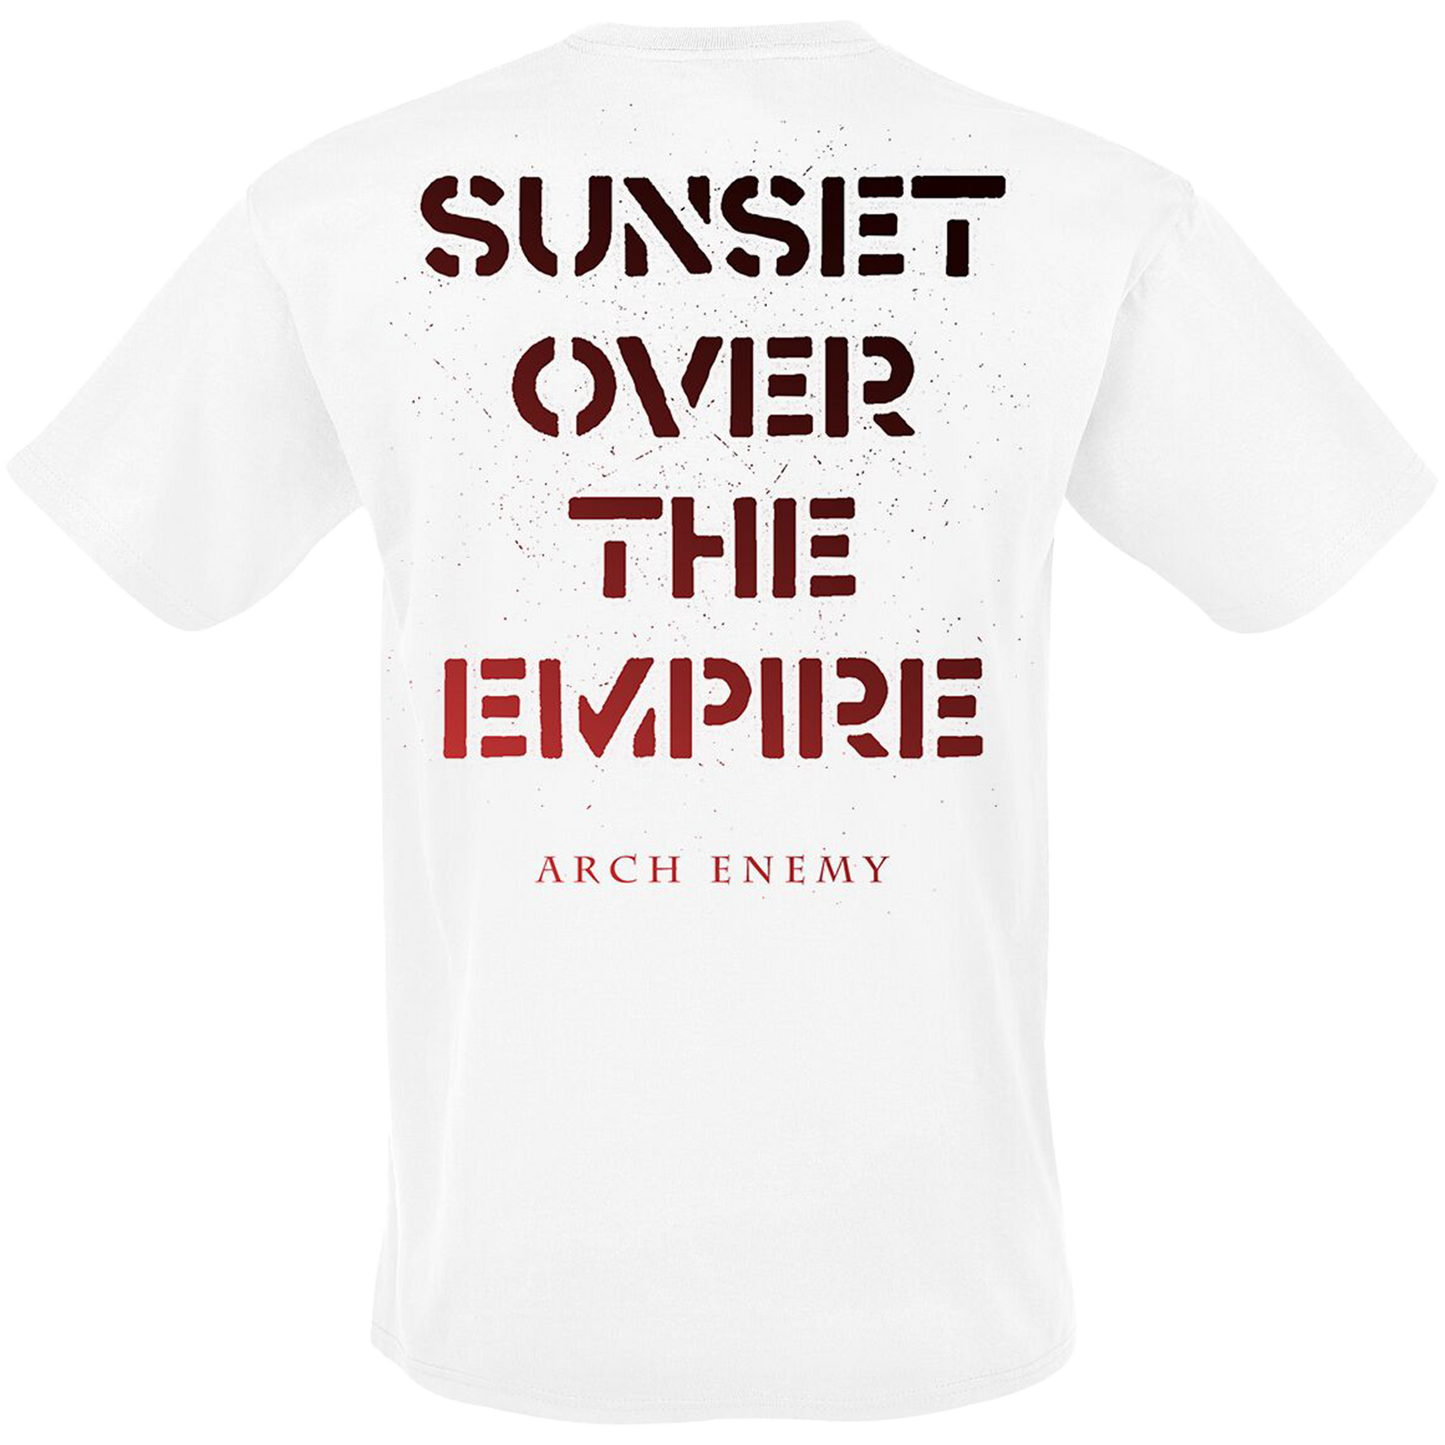 SUNSET OVER THE EMPIRE